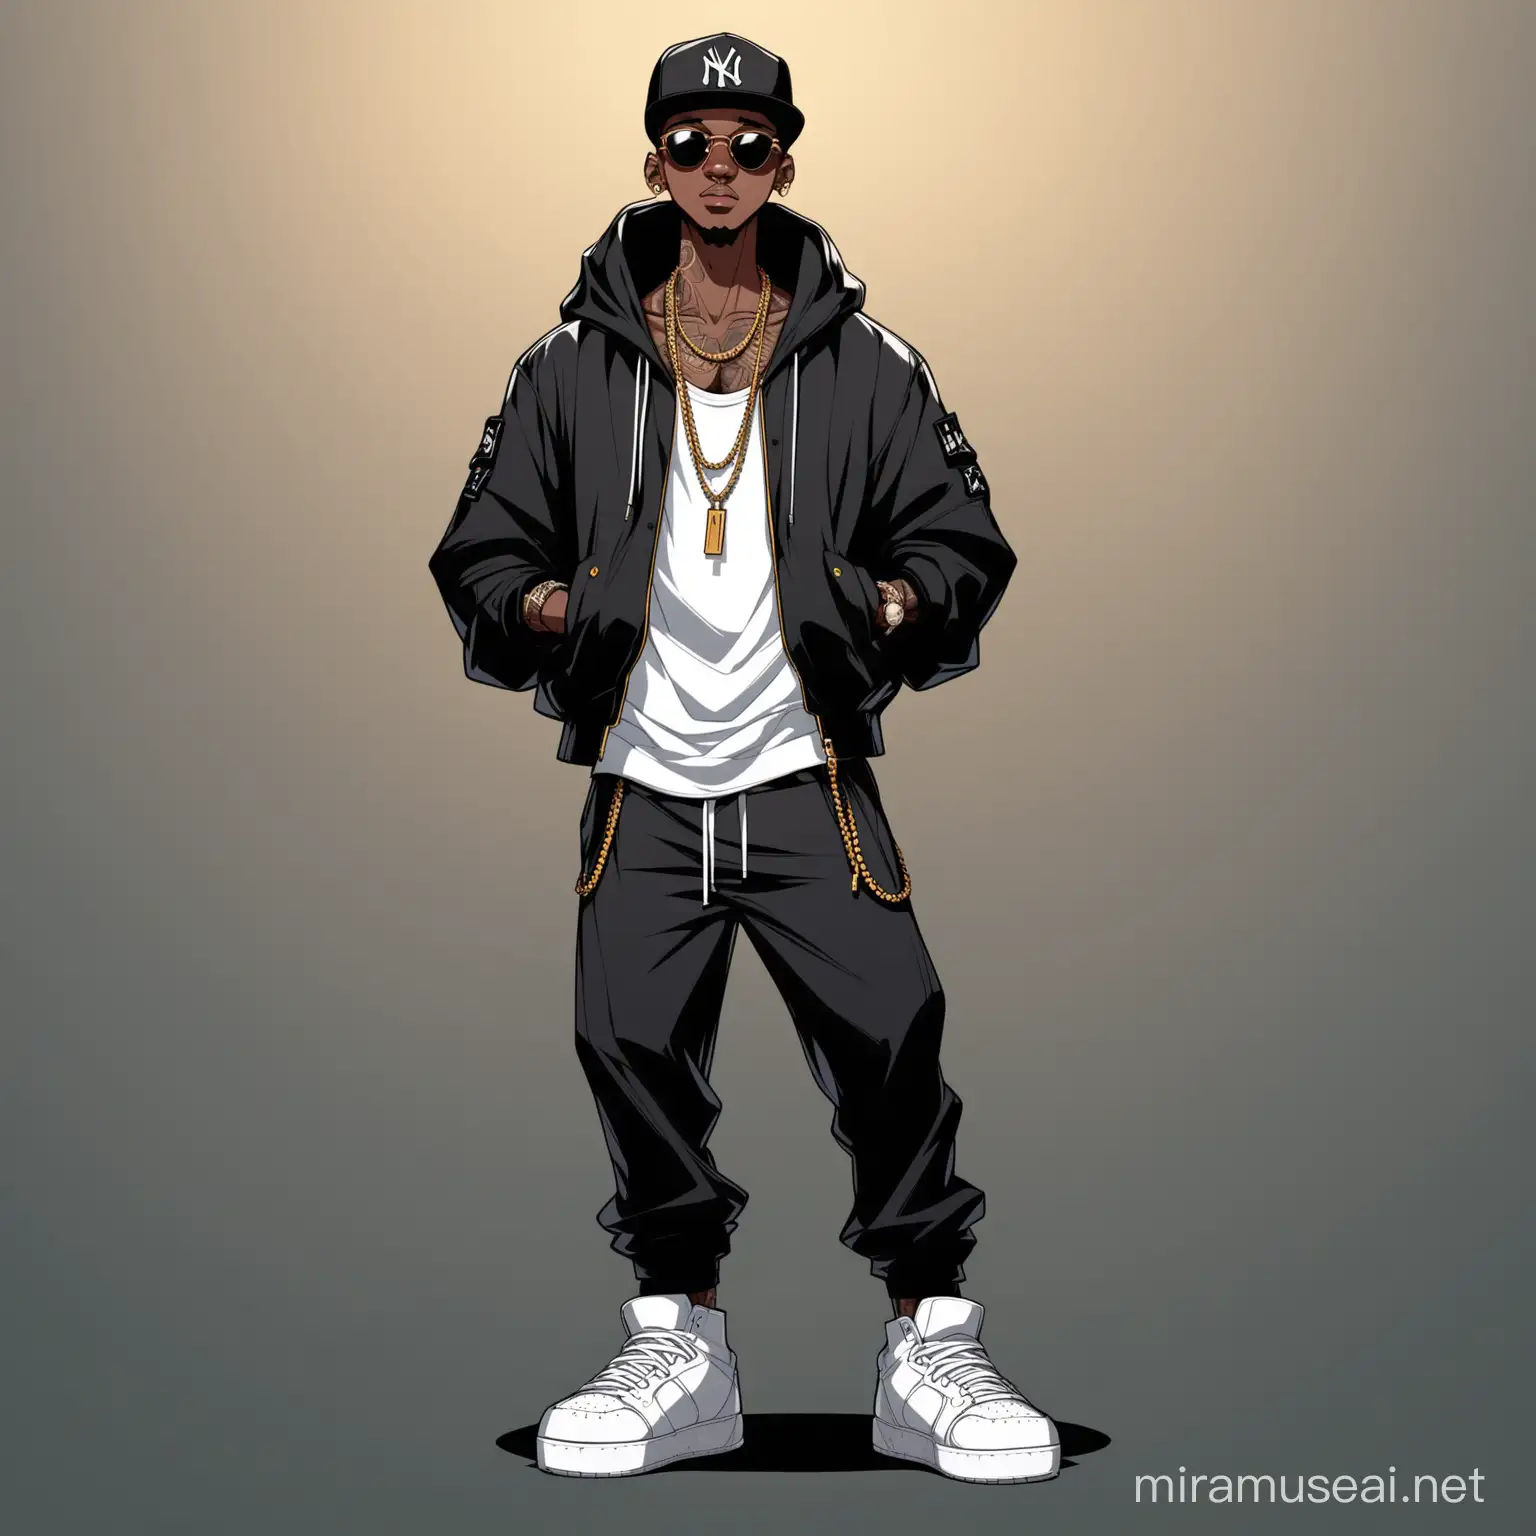 Animated art slim black rapper with a low cut full body 